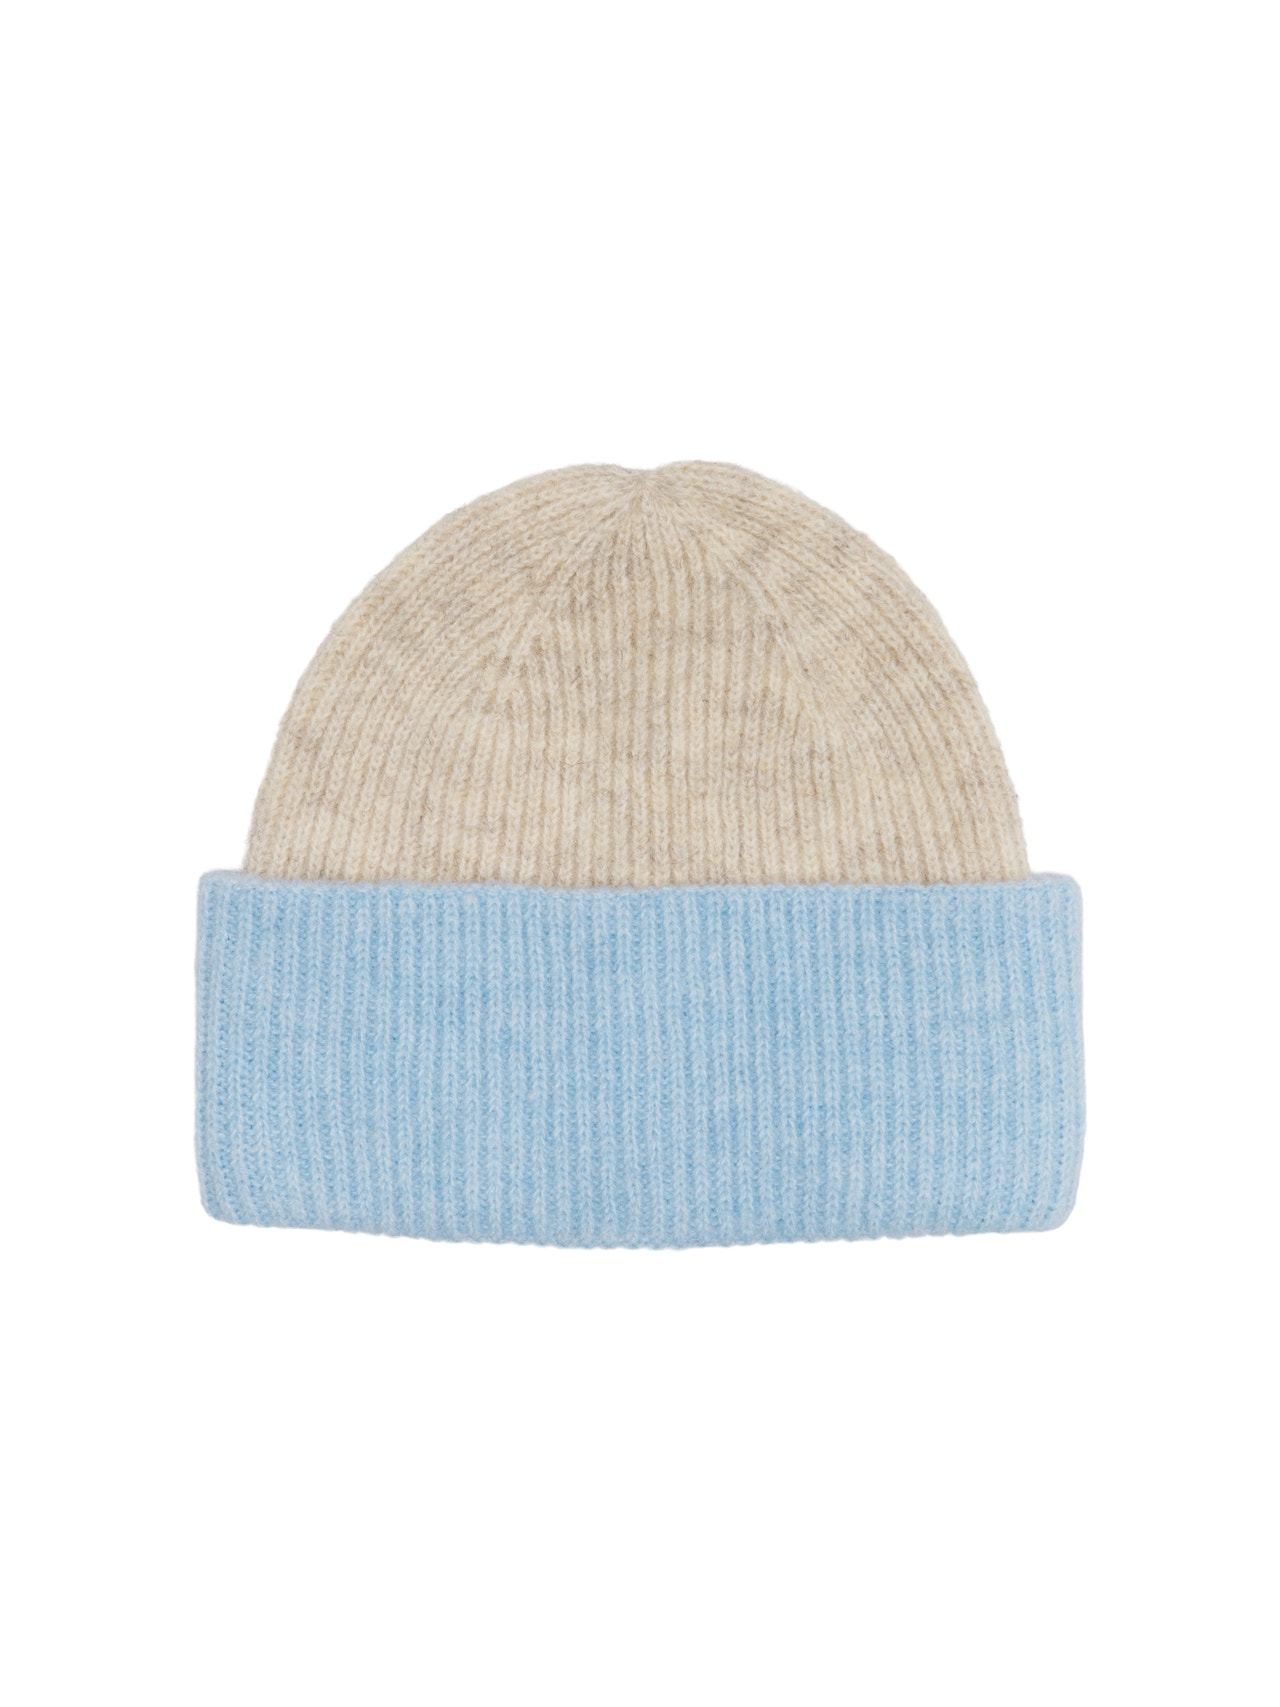 ONLY Beanies -Pumice Stone - 15298507